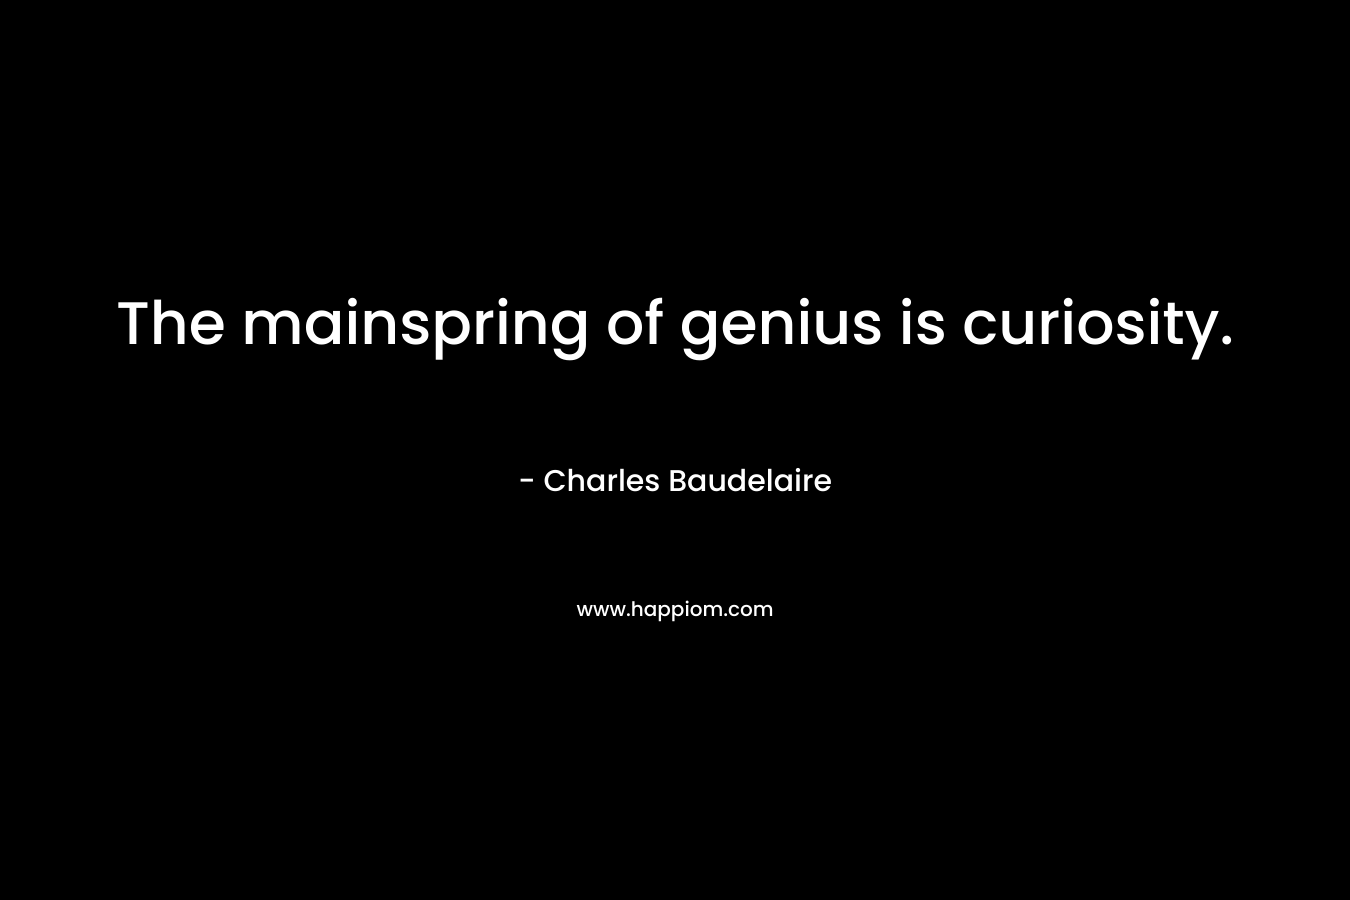 The mainspring of genius is curiosity. – Charles Baudelaire